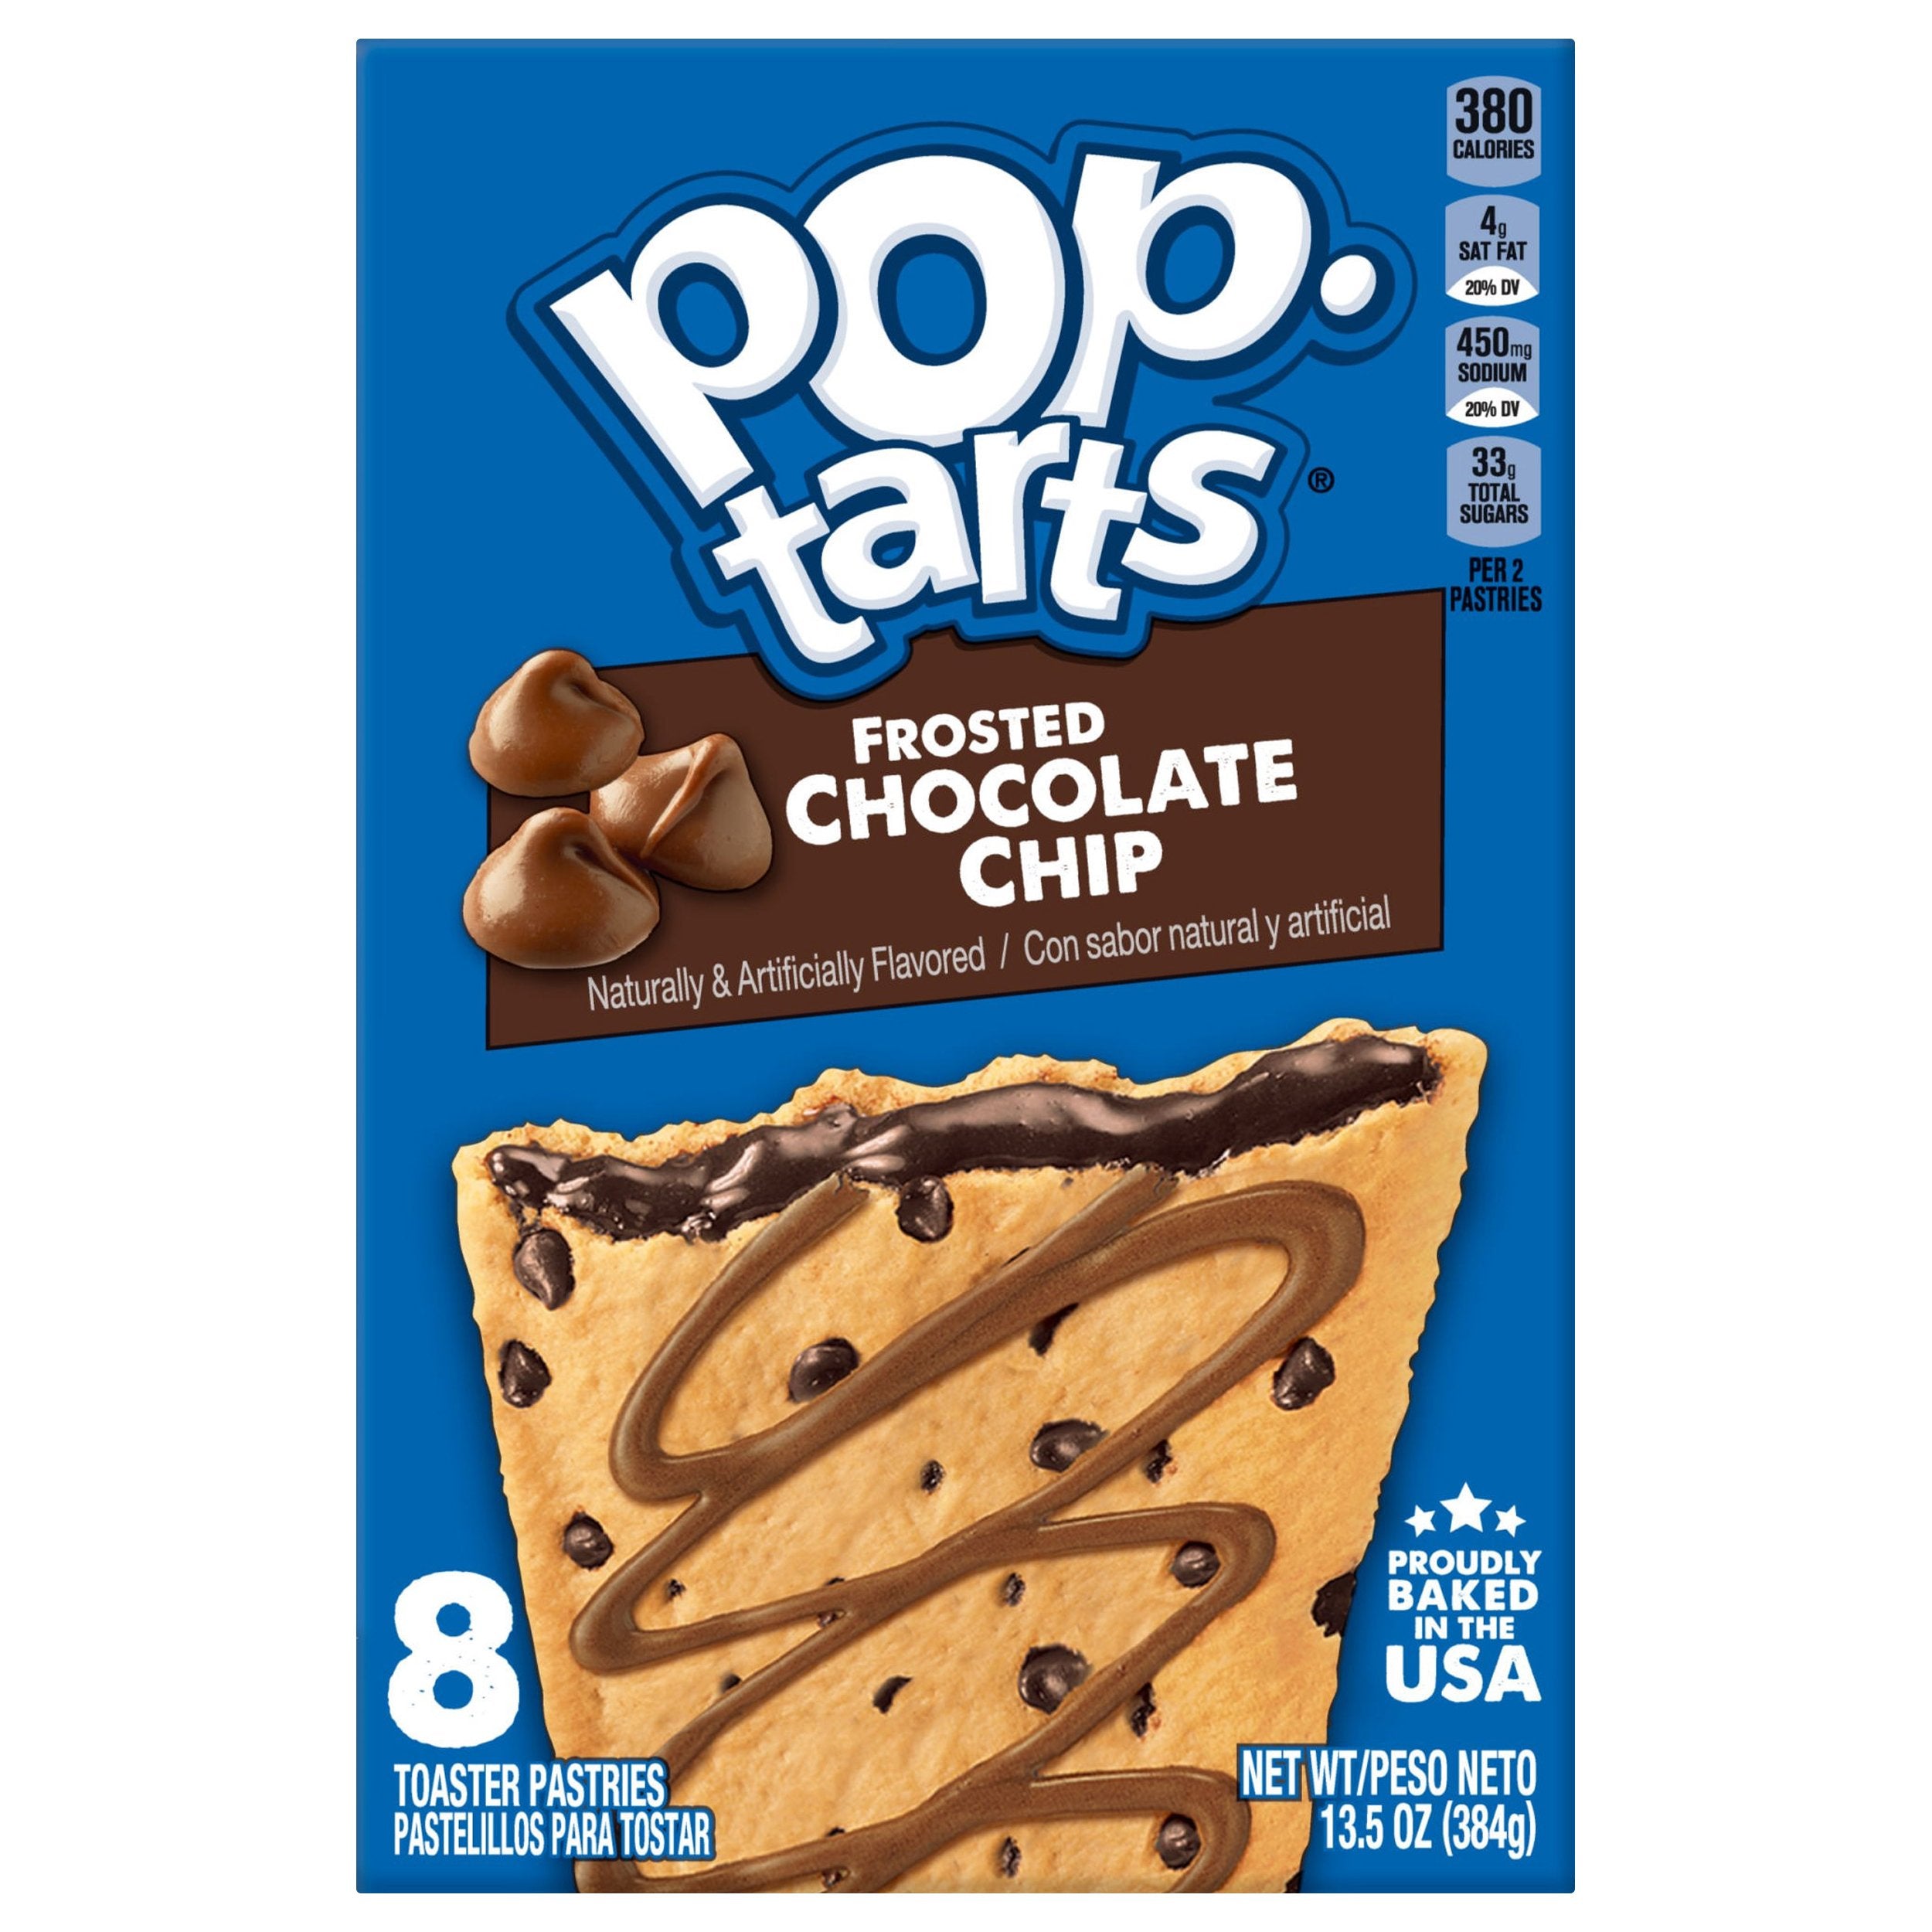 NEW POP-TARTS FROSTED CHOCOLATEY CHIP PANCAKE MAKES ALL-DAY